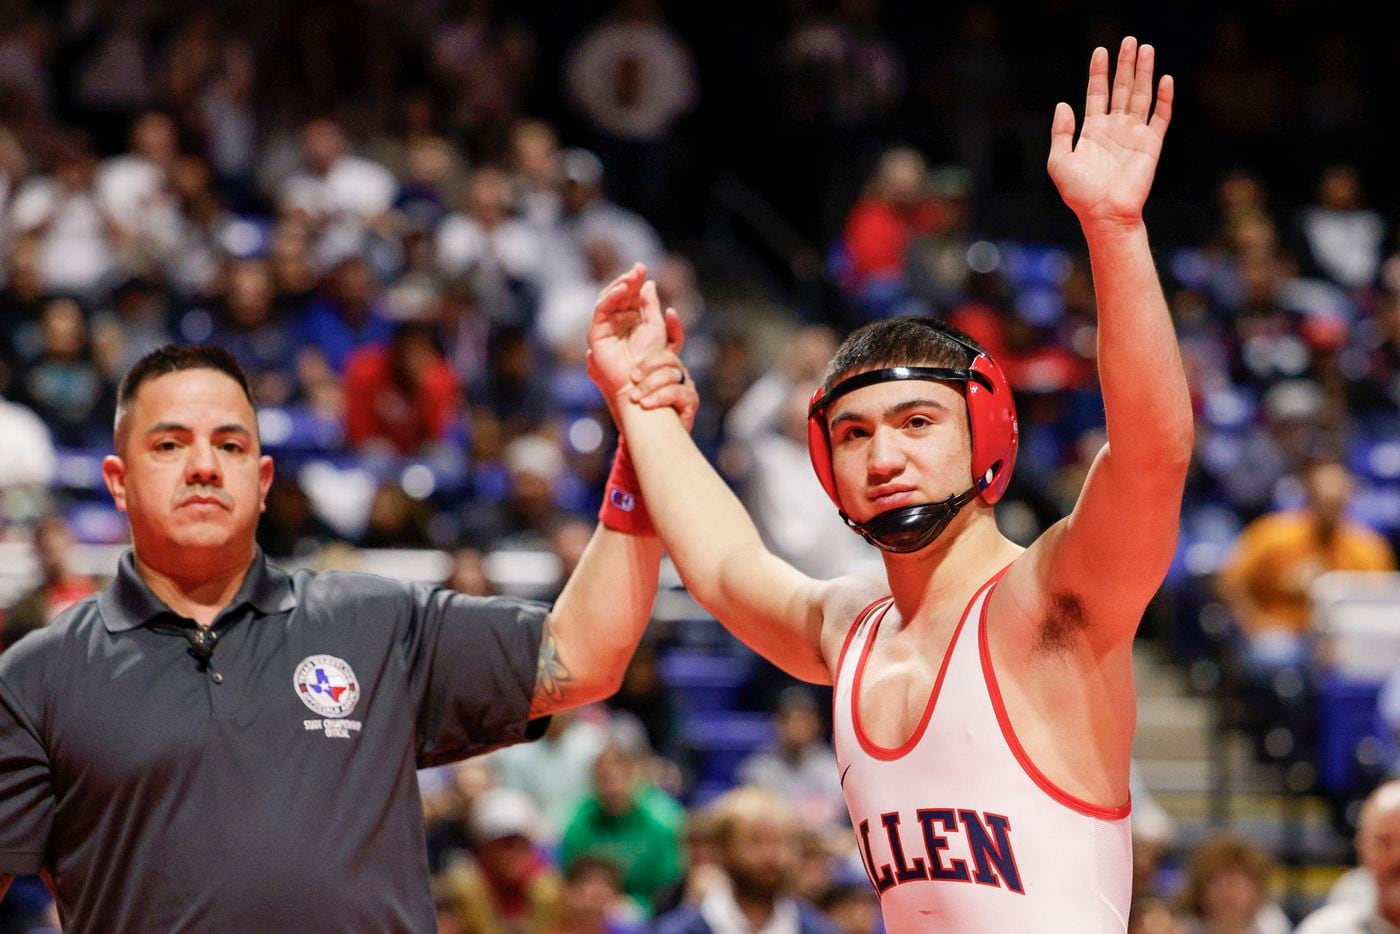 Kade Moore of Allen waves to the crowd after winning the 6A boys 138-pound UIL State...